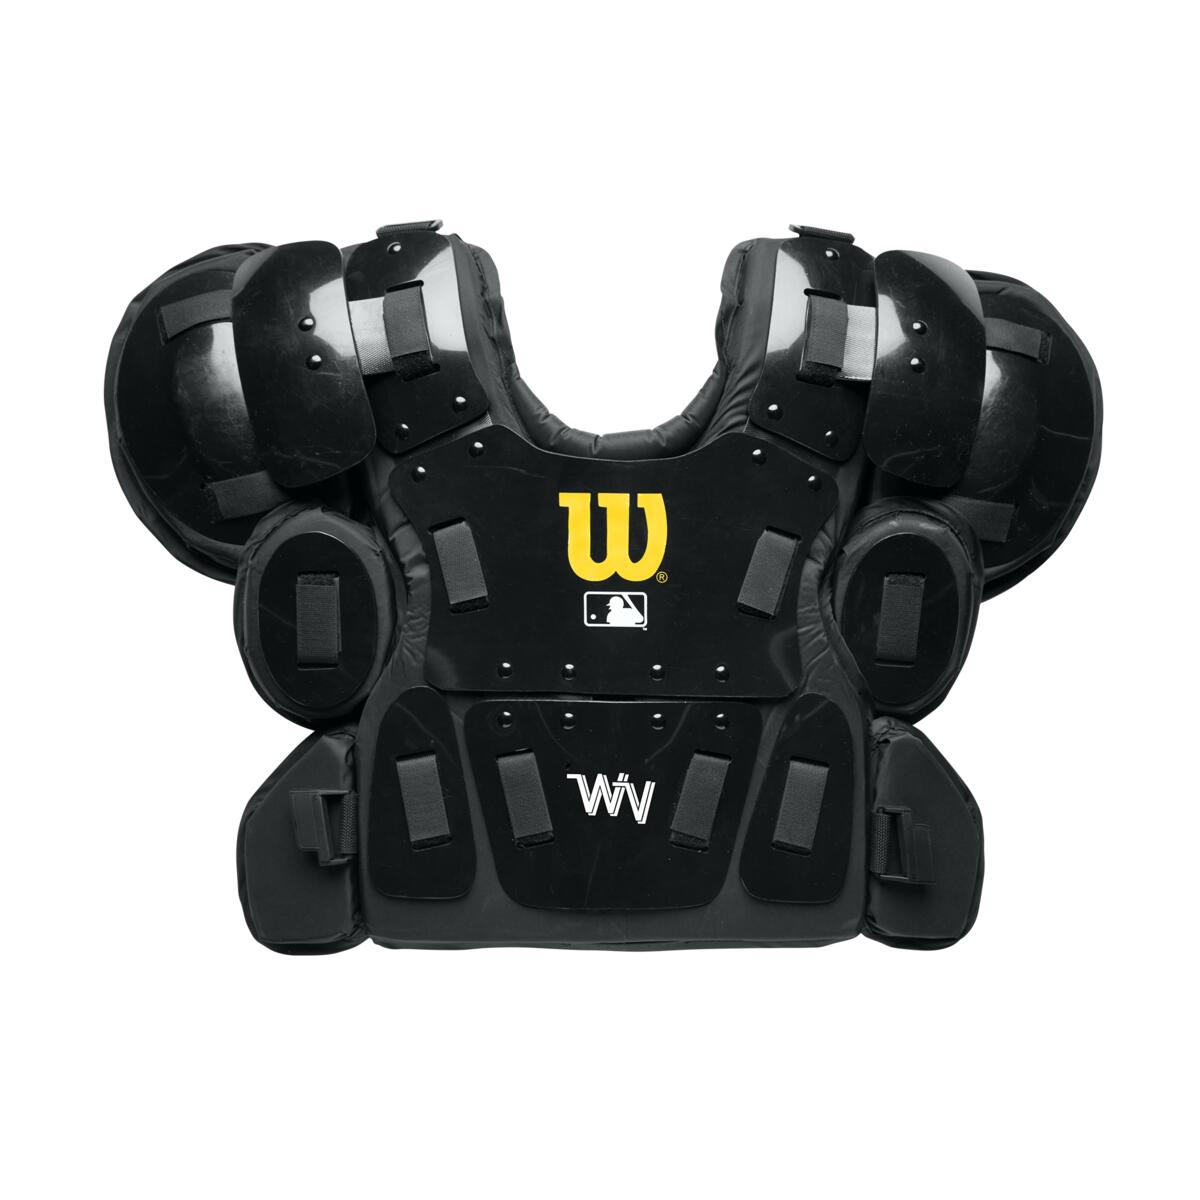 Wilson Pro Gold 2 Umpire Chest Protector-Air Management